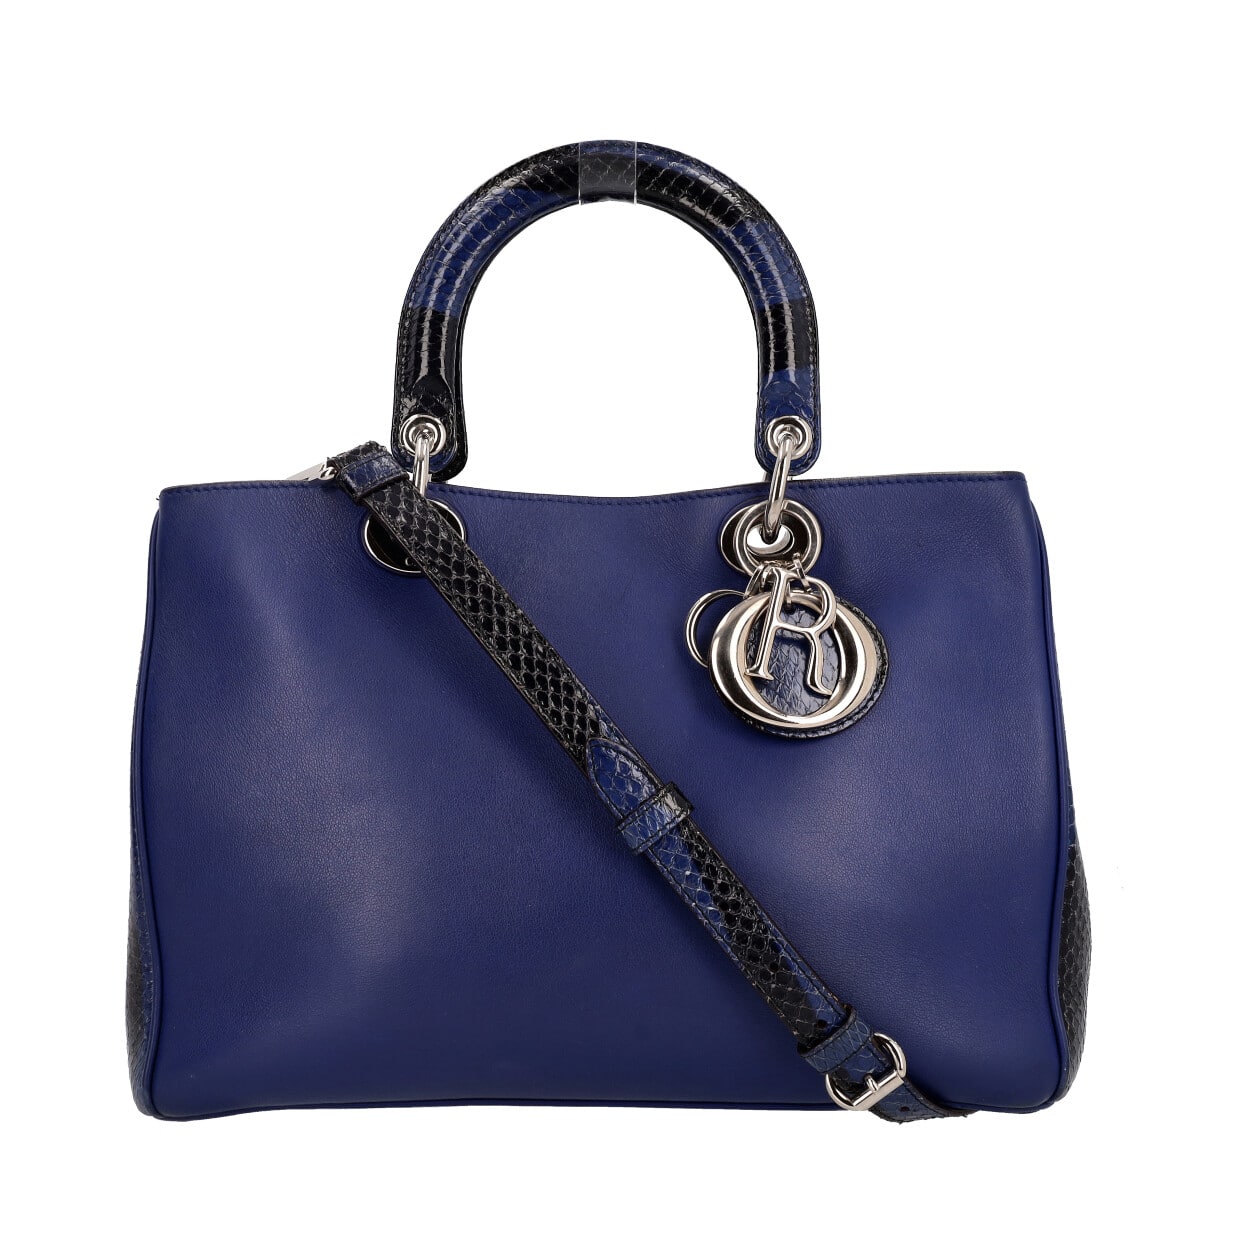 CHRISTIAN DIOR Leather/Python Diorissimo Tote Blue | Luxity